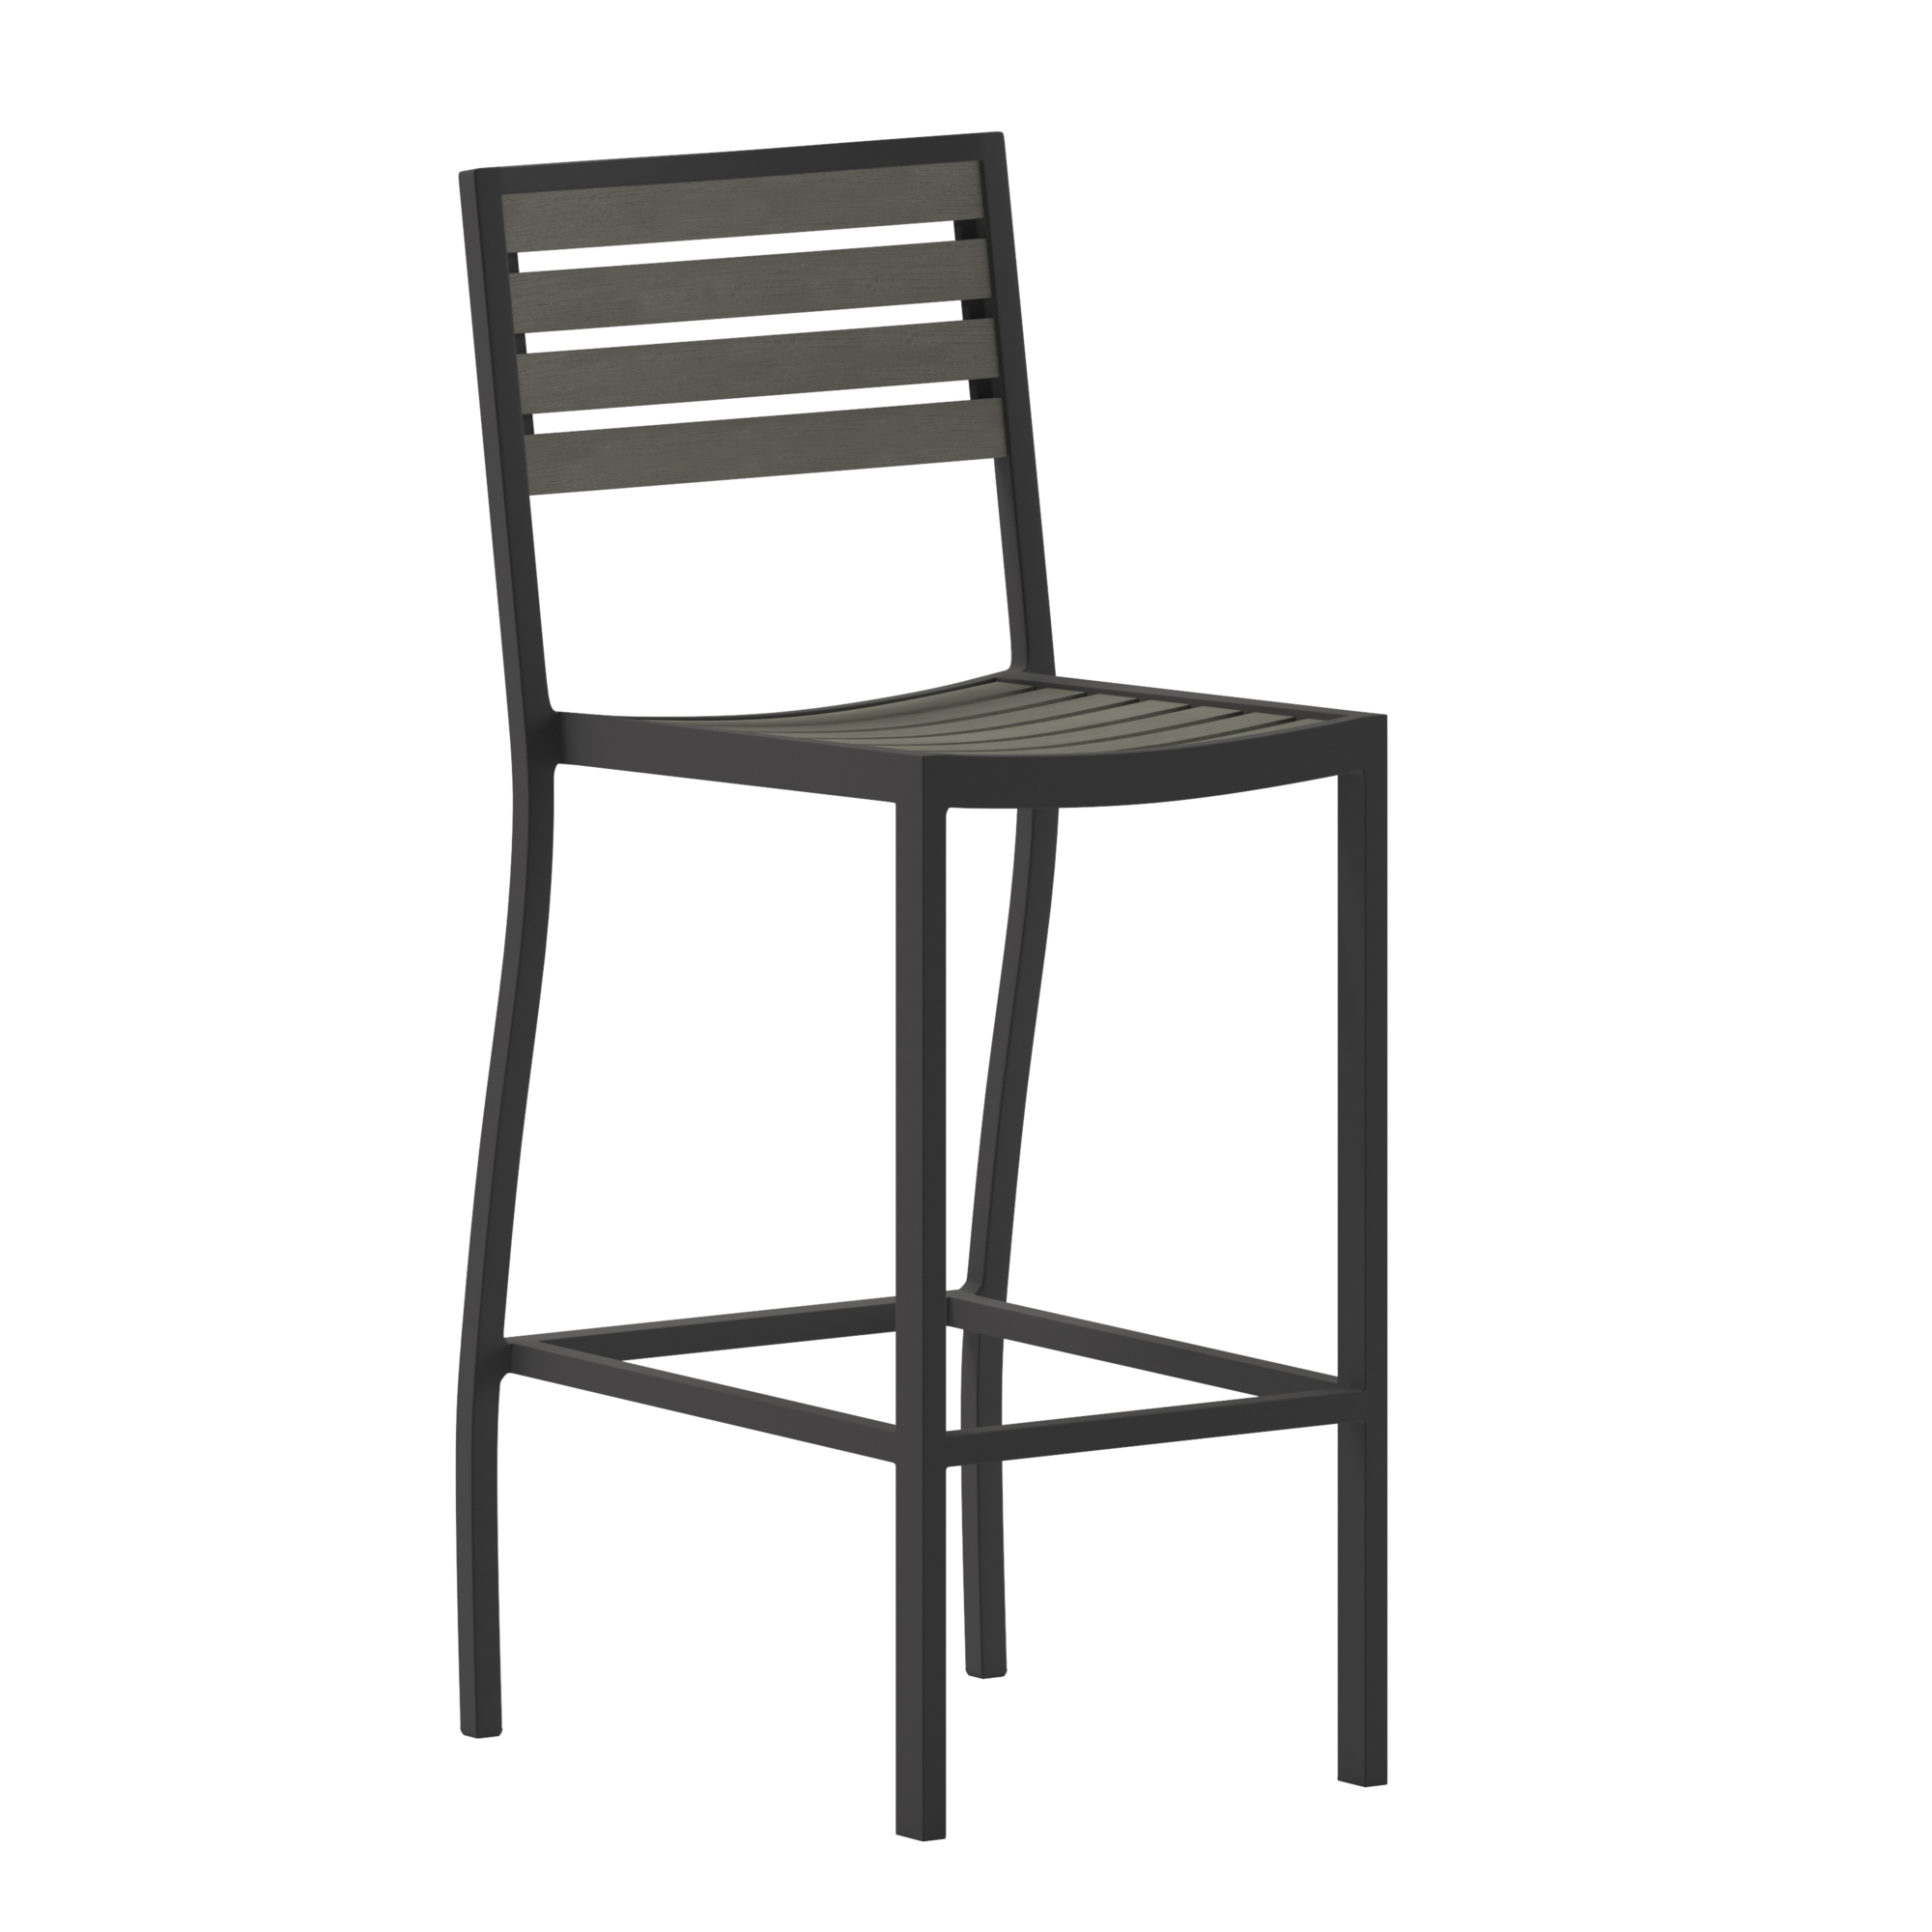 Flash Furniture, All-Weather Patio Bar Stool with Gray Wash Slats, Primary Color Gray, Material Aluminum, Width 18.25 in, Model XUDGHW6036BGY